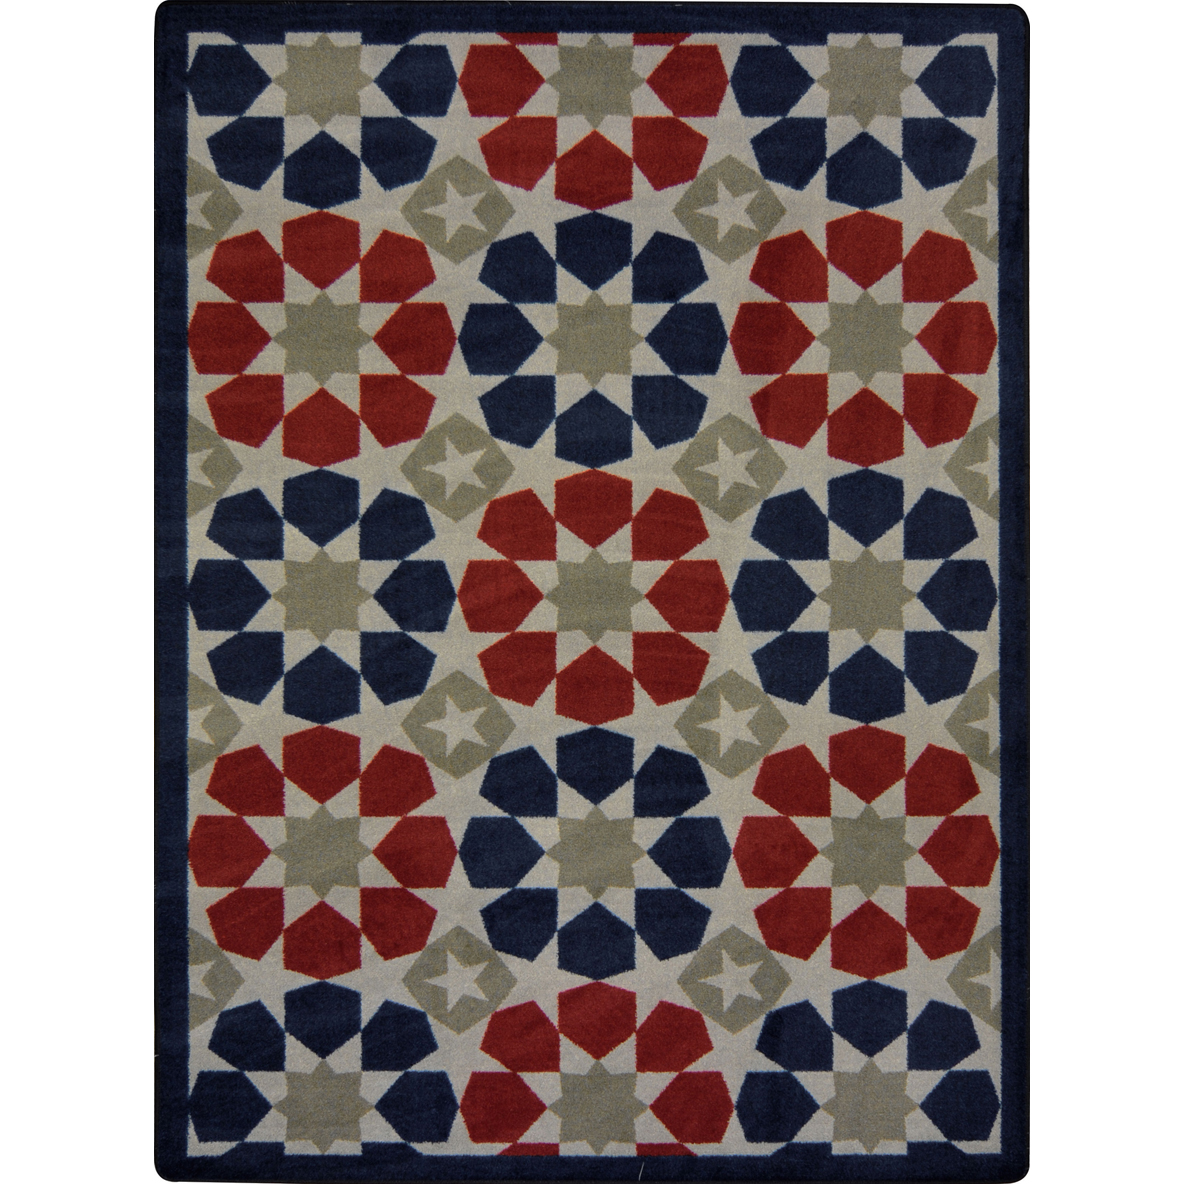 64-Inch by 92-Inch by 0.36-Inch Green Joy Carpets Kaleidoscope Pacific Rim Whimsical Area Rugs